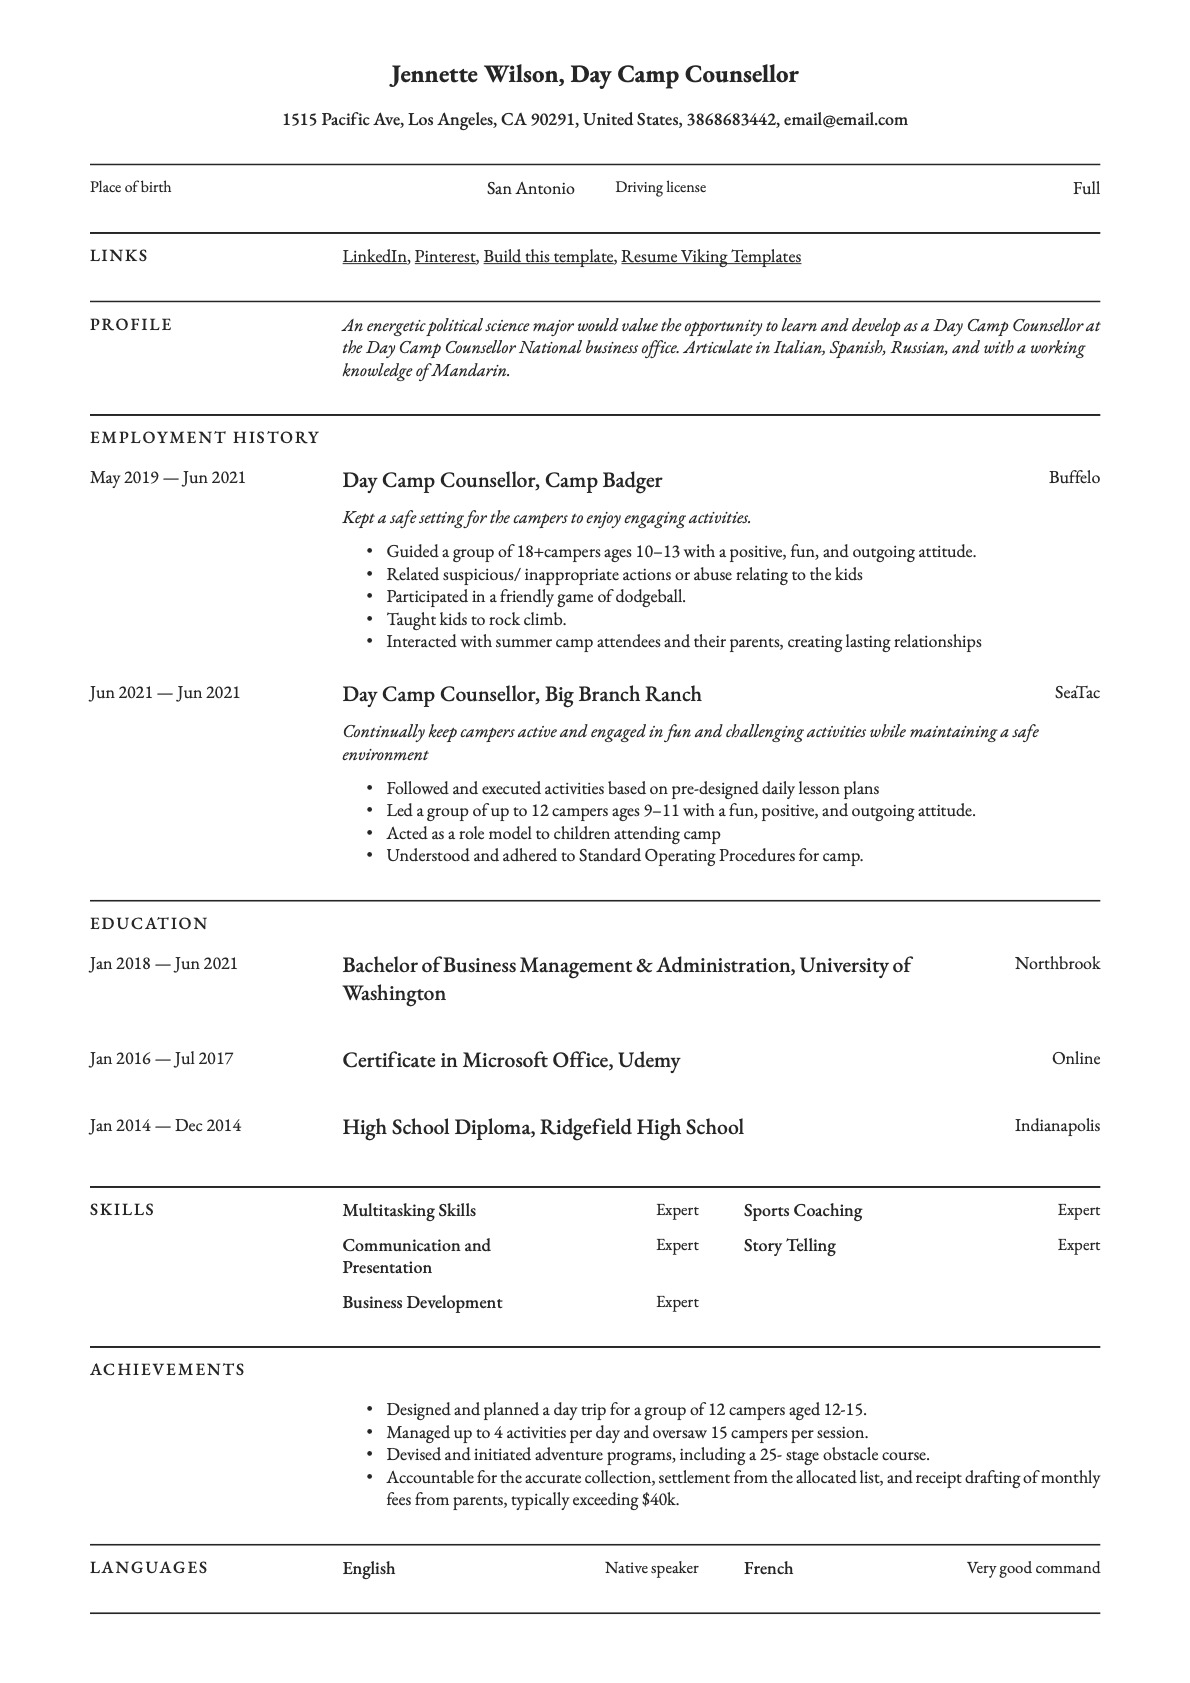 Professional Day Camp Counselor Resume